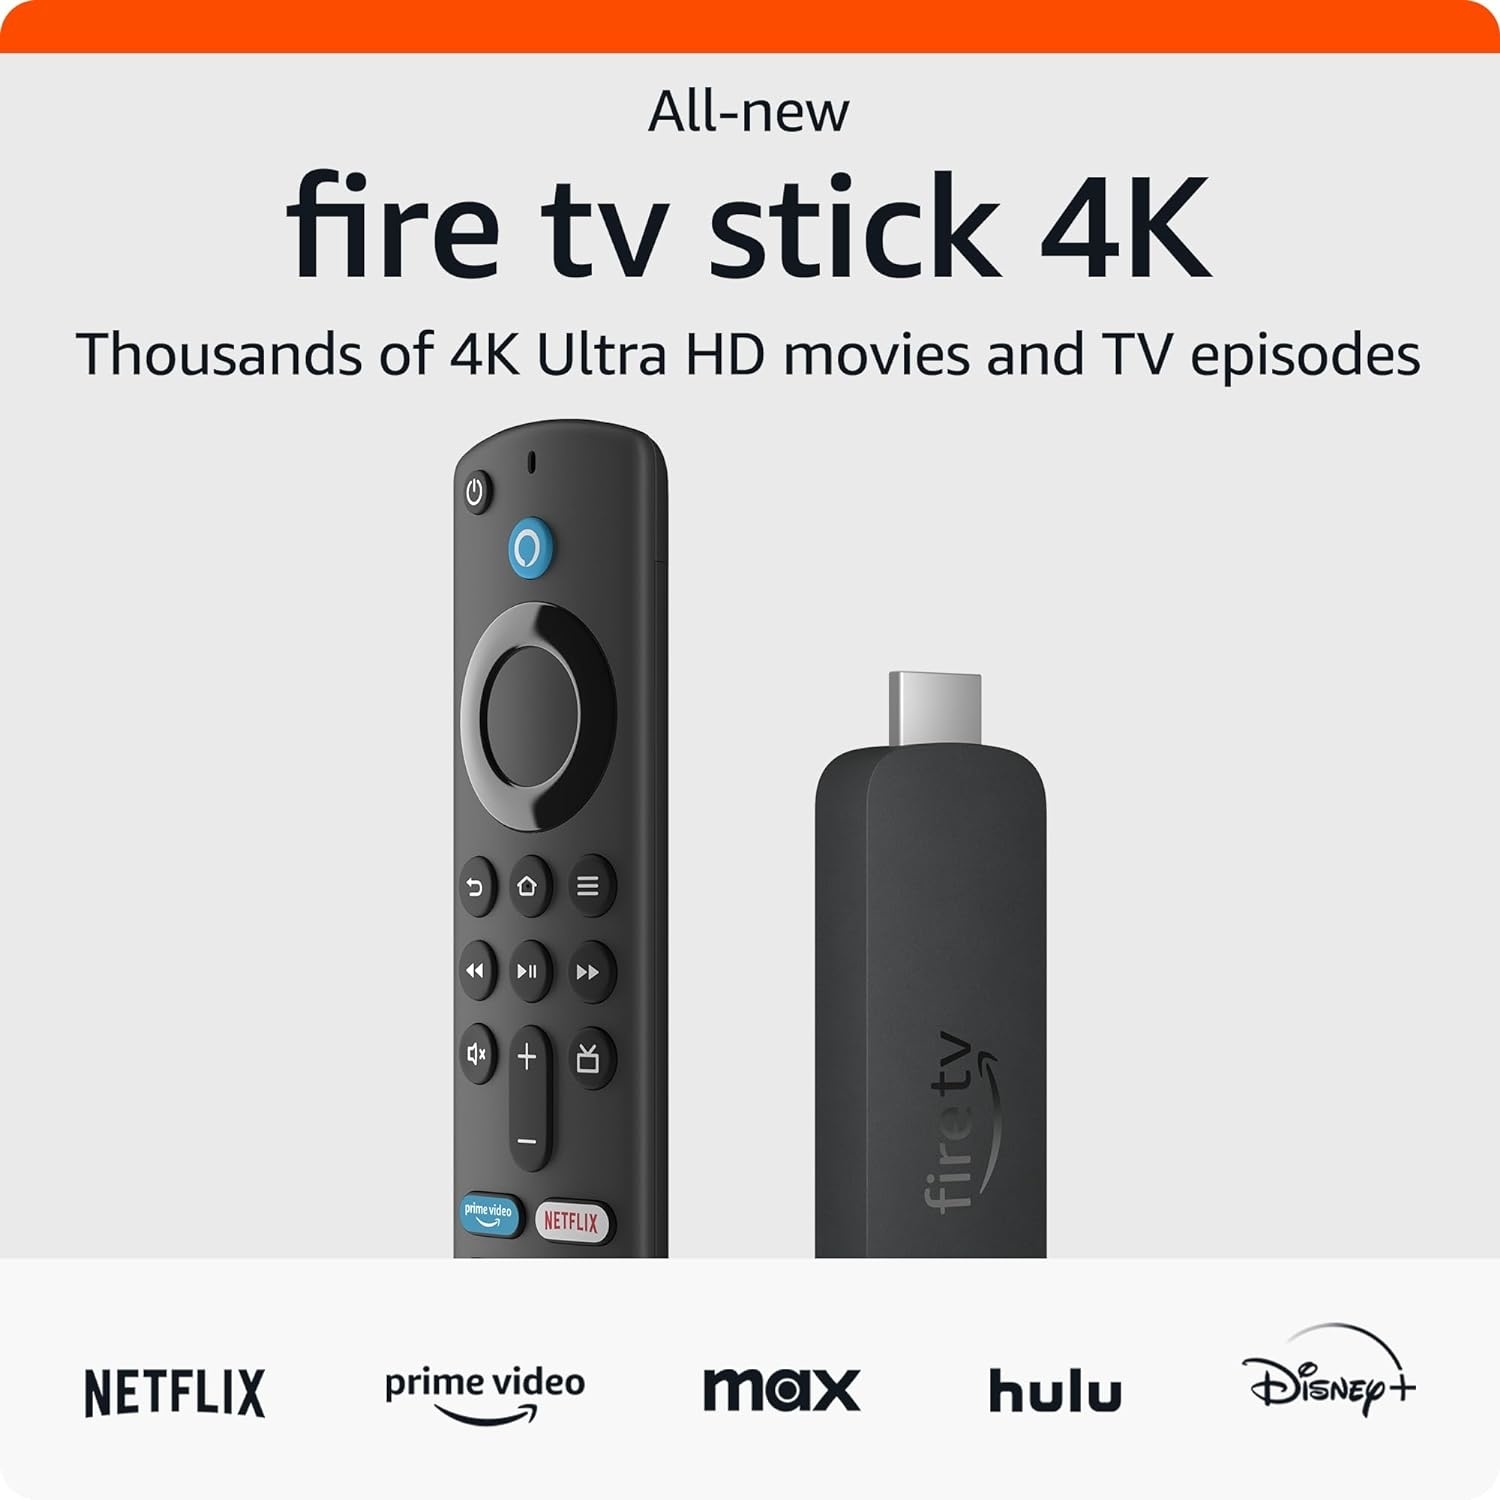 Ad for new Fire TV Stick 4K listing compatible streaming services, showcasing remote and device